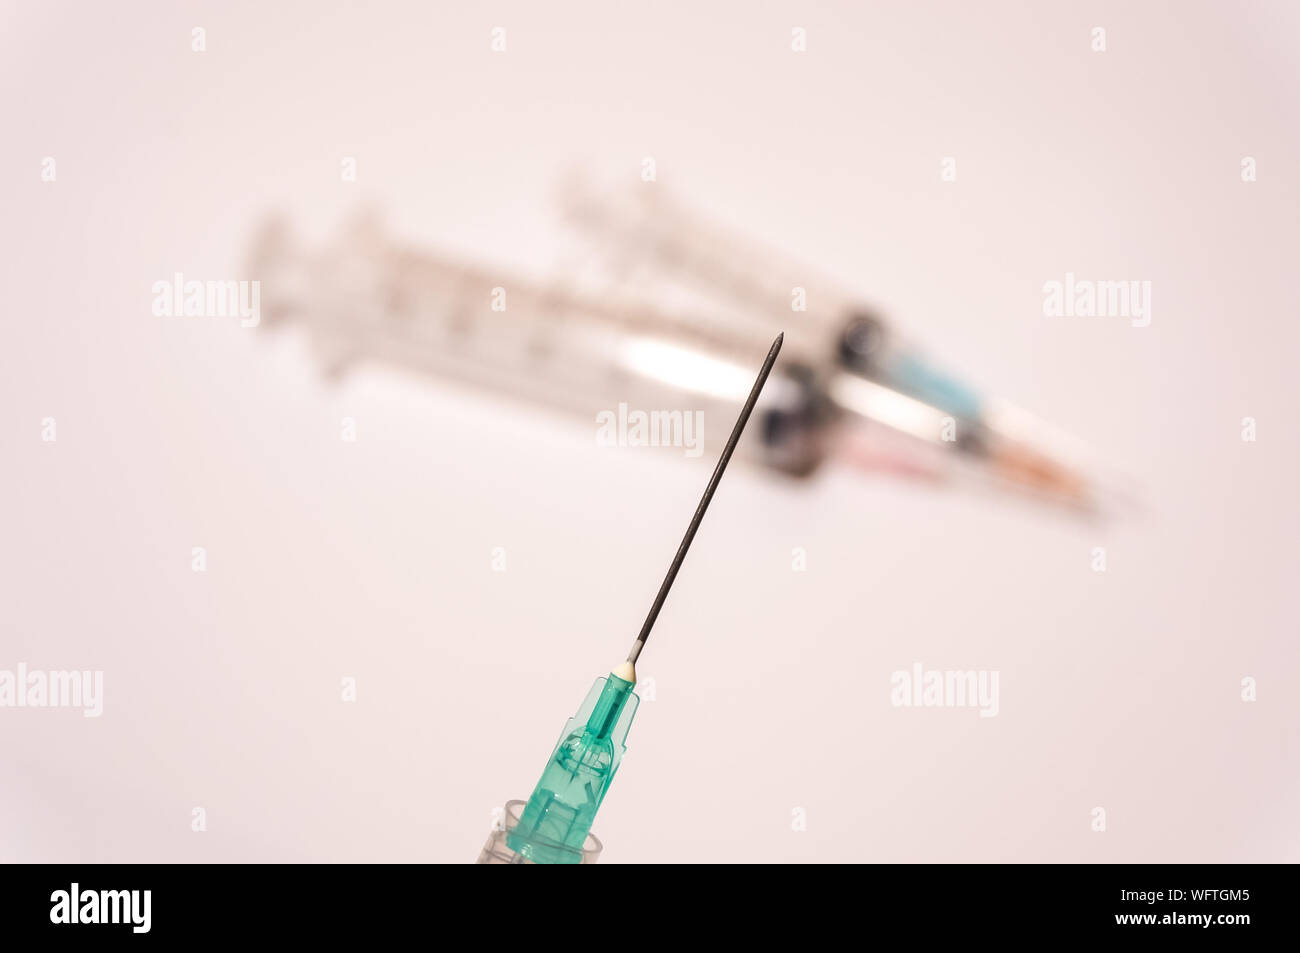 Close-up Of Injections Against White Background Stock Photo